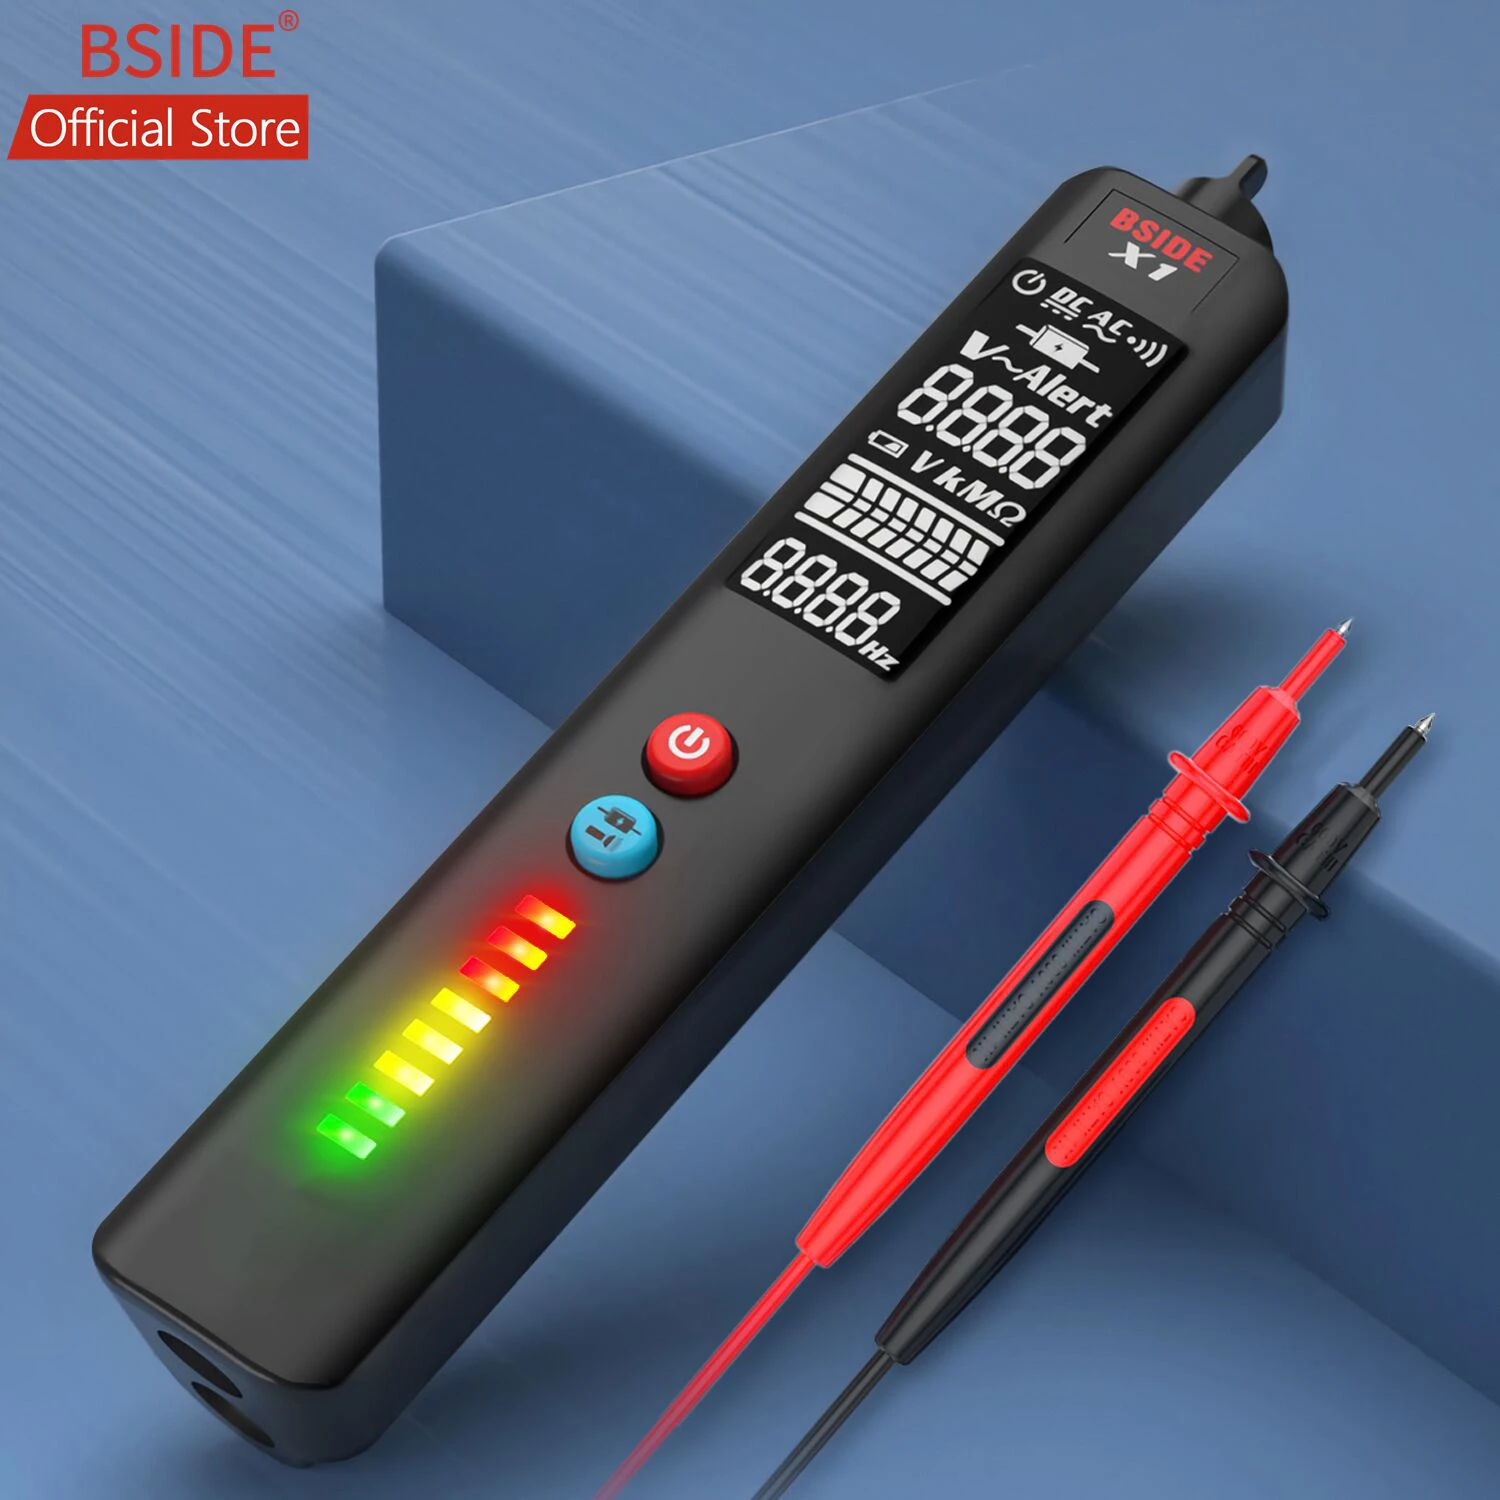 BSIDE Voltage Tester EBTN LCD 3-Line Display Voltage Detector Non-contact AC Pen Live Wire Breakpoint Locate with Protect Case